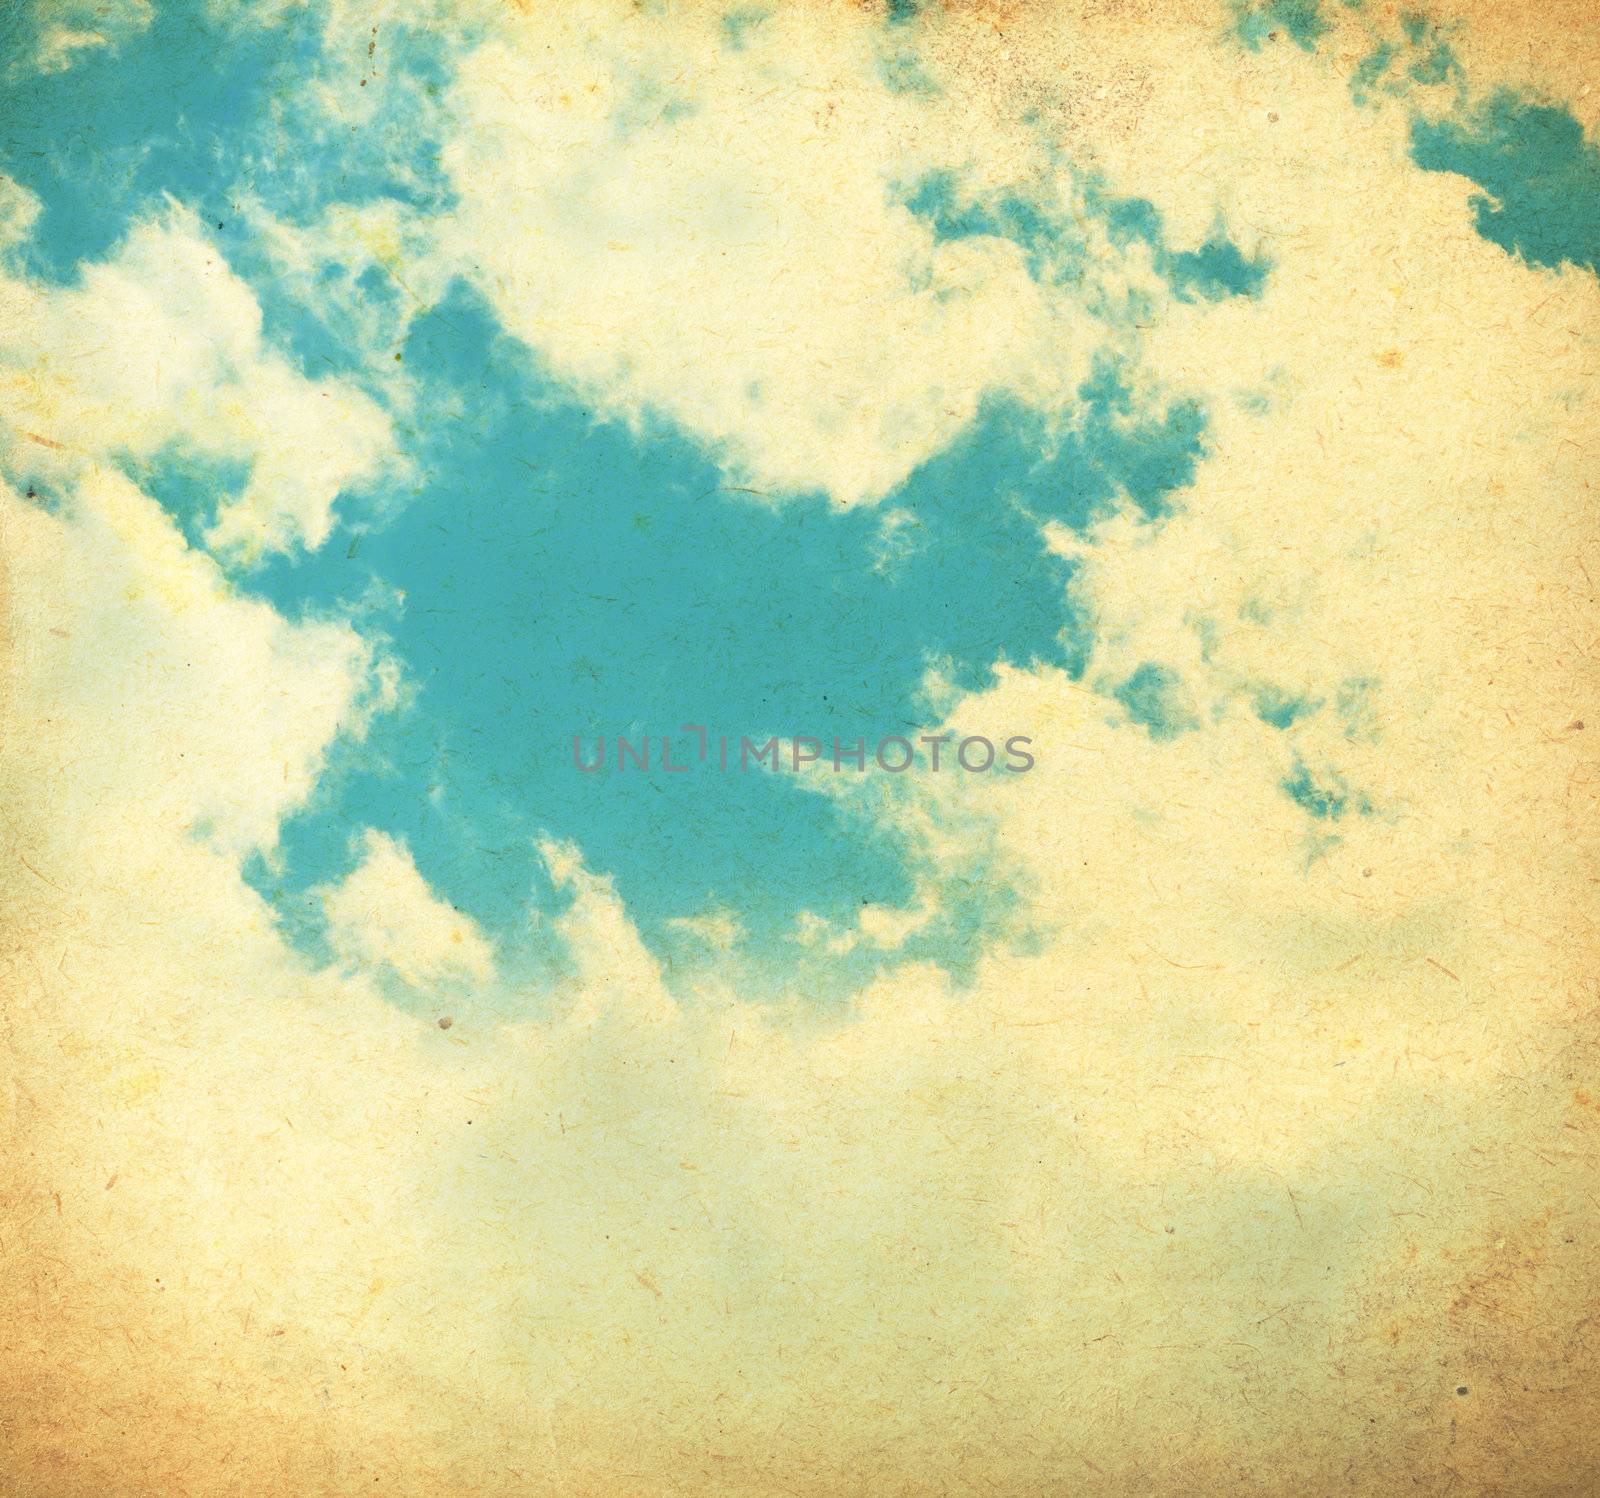 Vintage sky and clouds on old paper texture for background